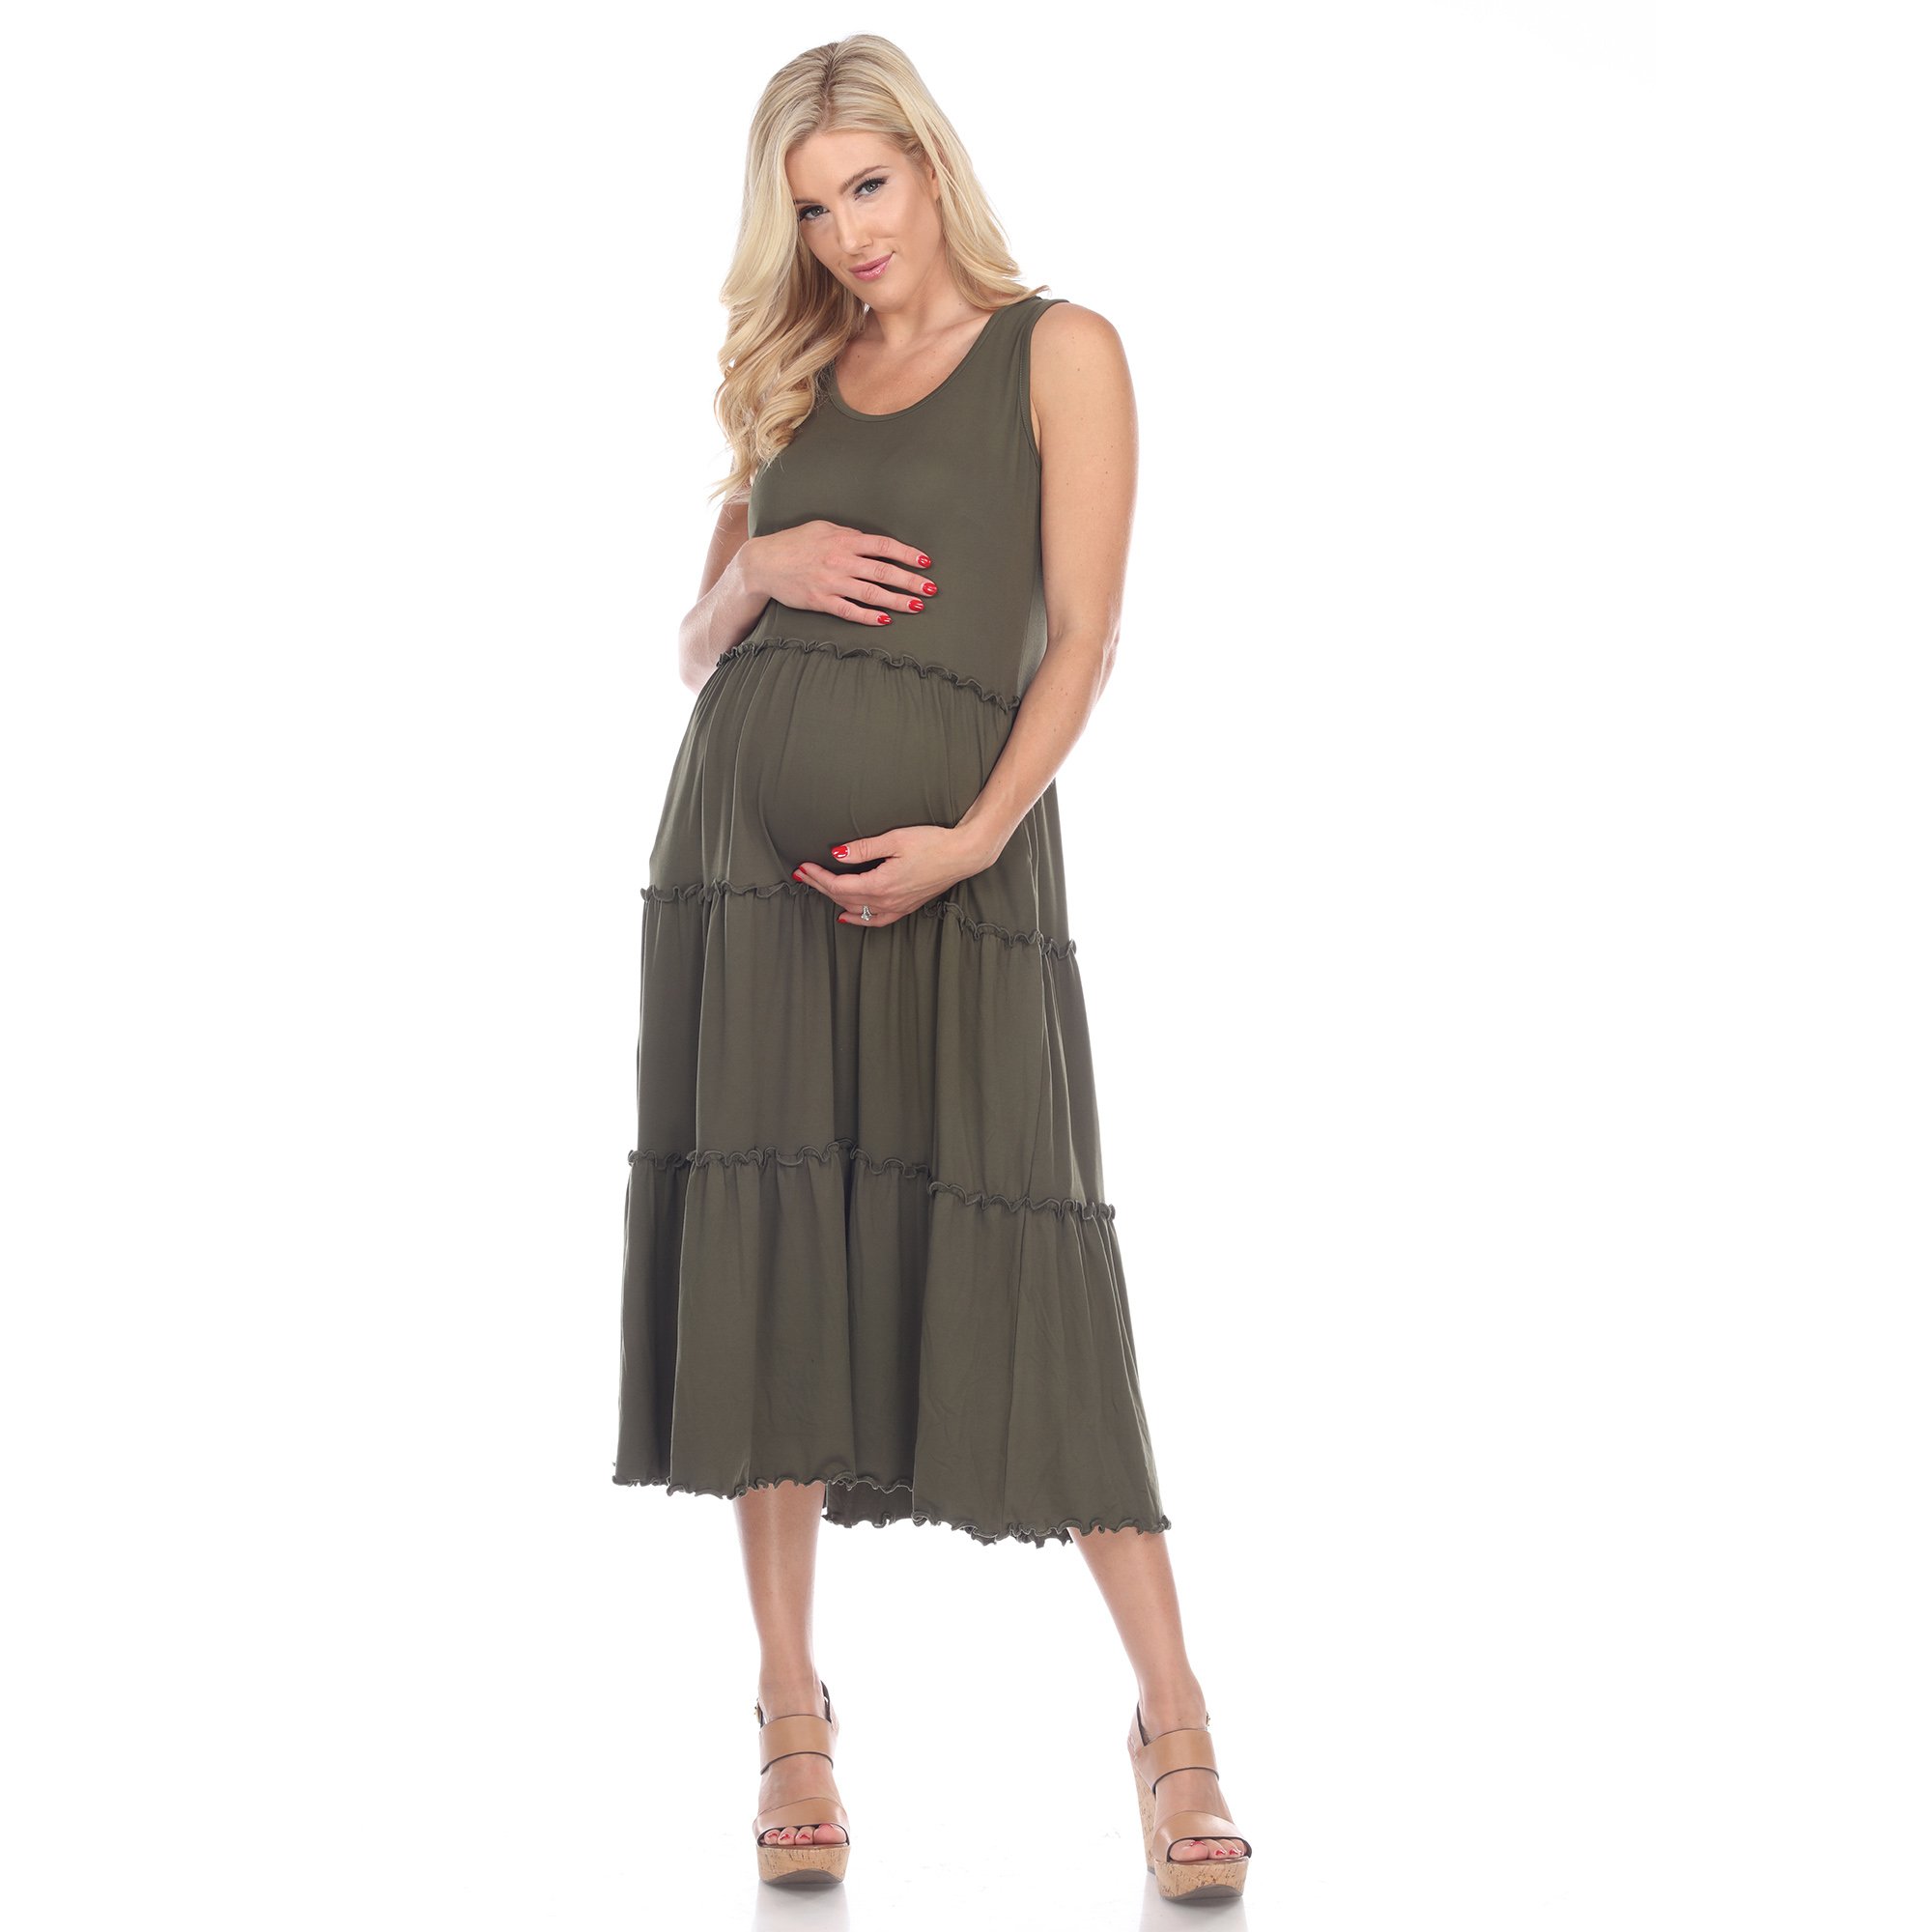 White Mark Women's Maternity Scoop Neck Tiered Midi Dress - Charcoal, Large